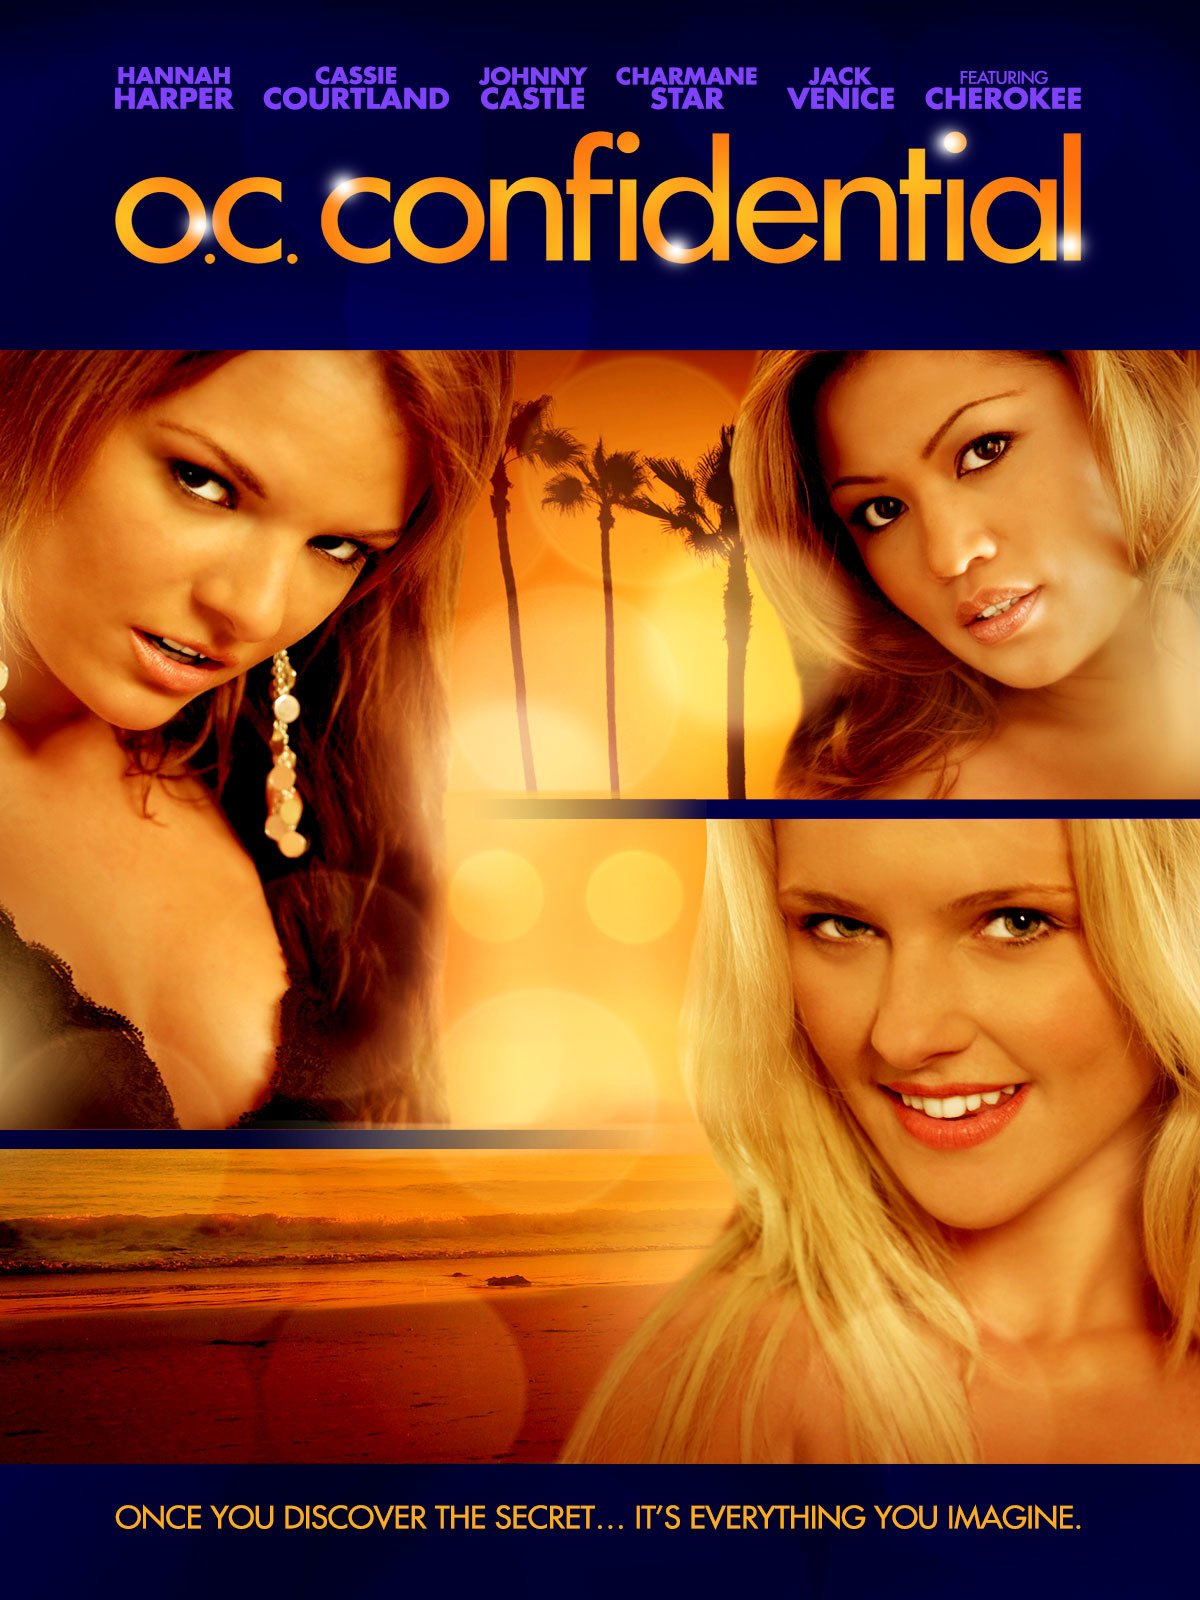 dennis hardison recommends Cast Of Coed Confidentials